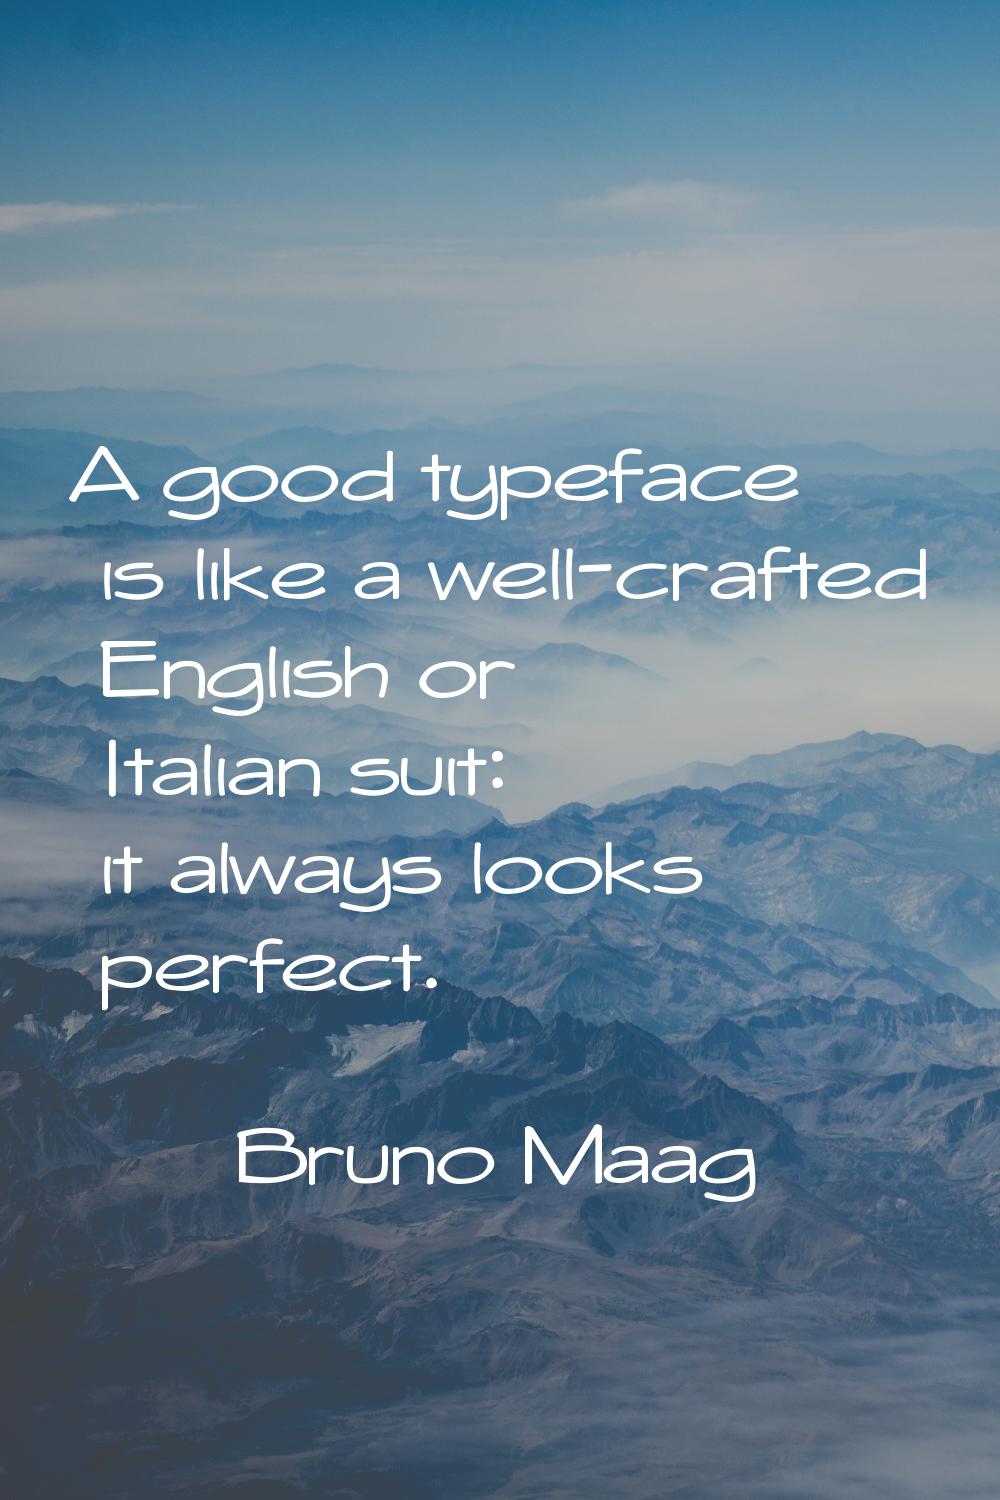 A good typeface is like a well-crafted English or Italian suit: it always looks perfect.